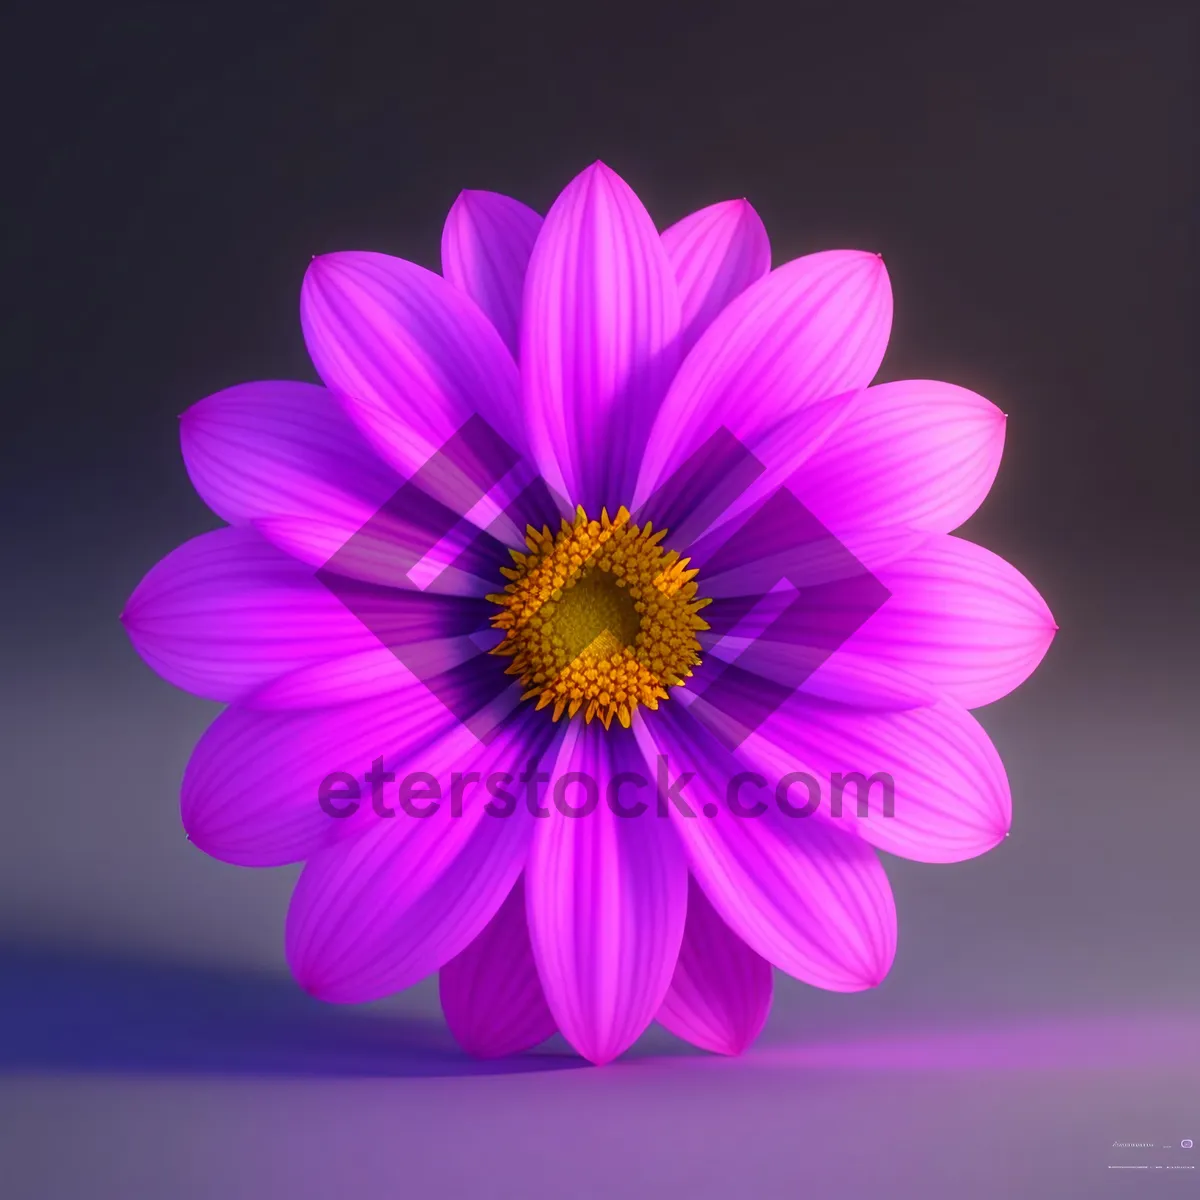 Picture of Vibrant Pink Daisy Blossom in Full Bloom